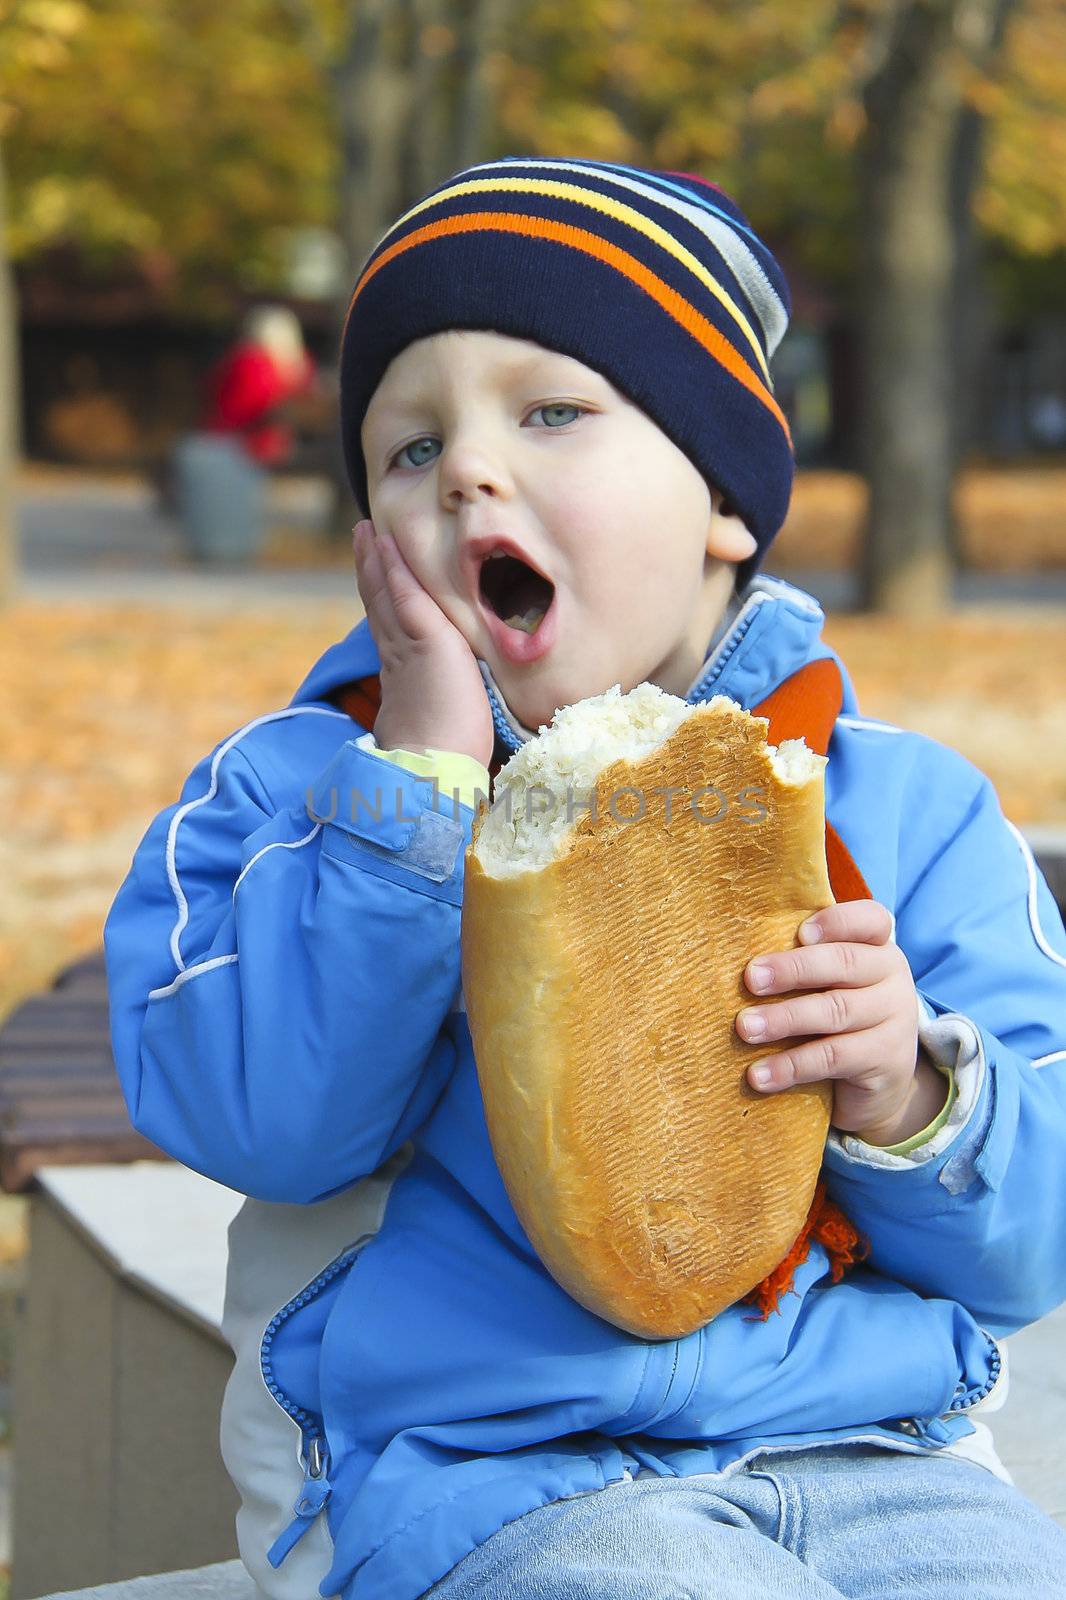 Baby with one hand holding his cheek in his other hand holds the bread. Walk in the autumn park